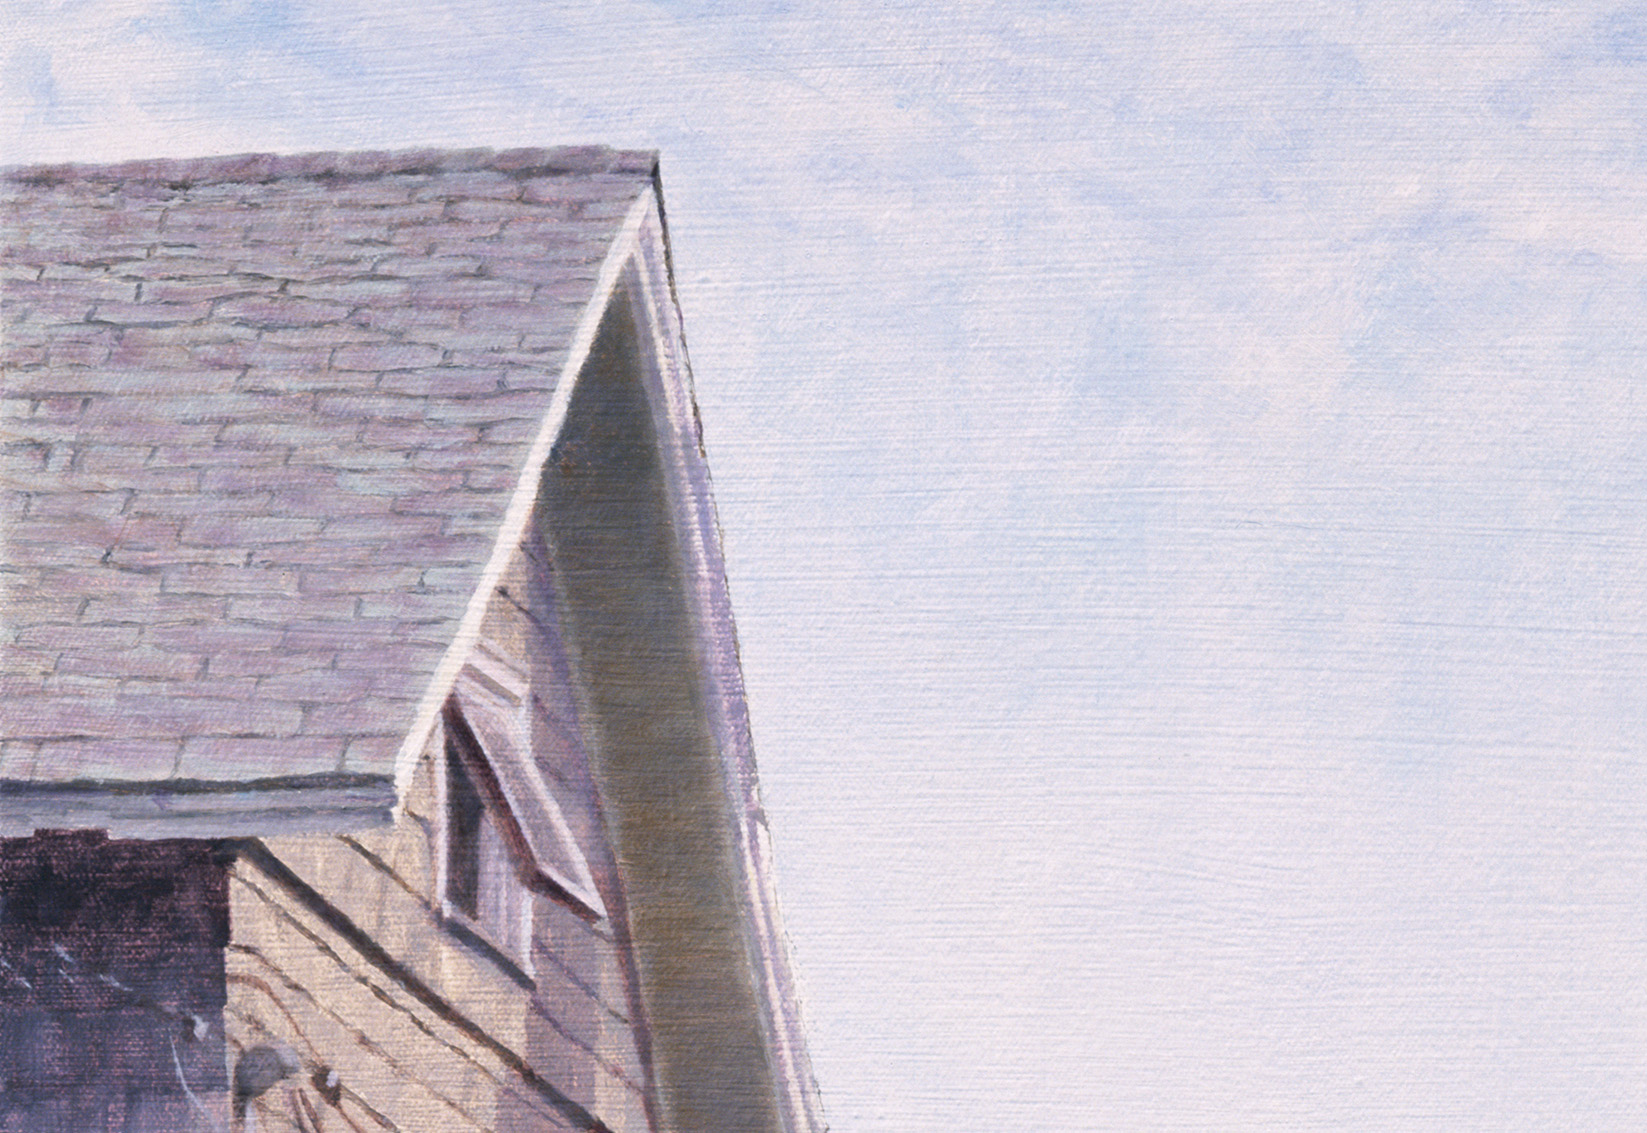 (a) 100% lft house roof and sky crop (a)  Between 2 Houses, Oil on Canvas, 27 in X 40 in, 2006, Jack Hoyer, 125MB for download copy.jpg